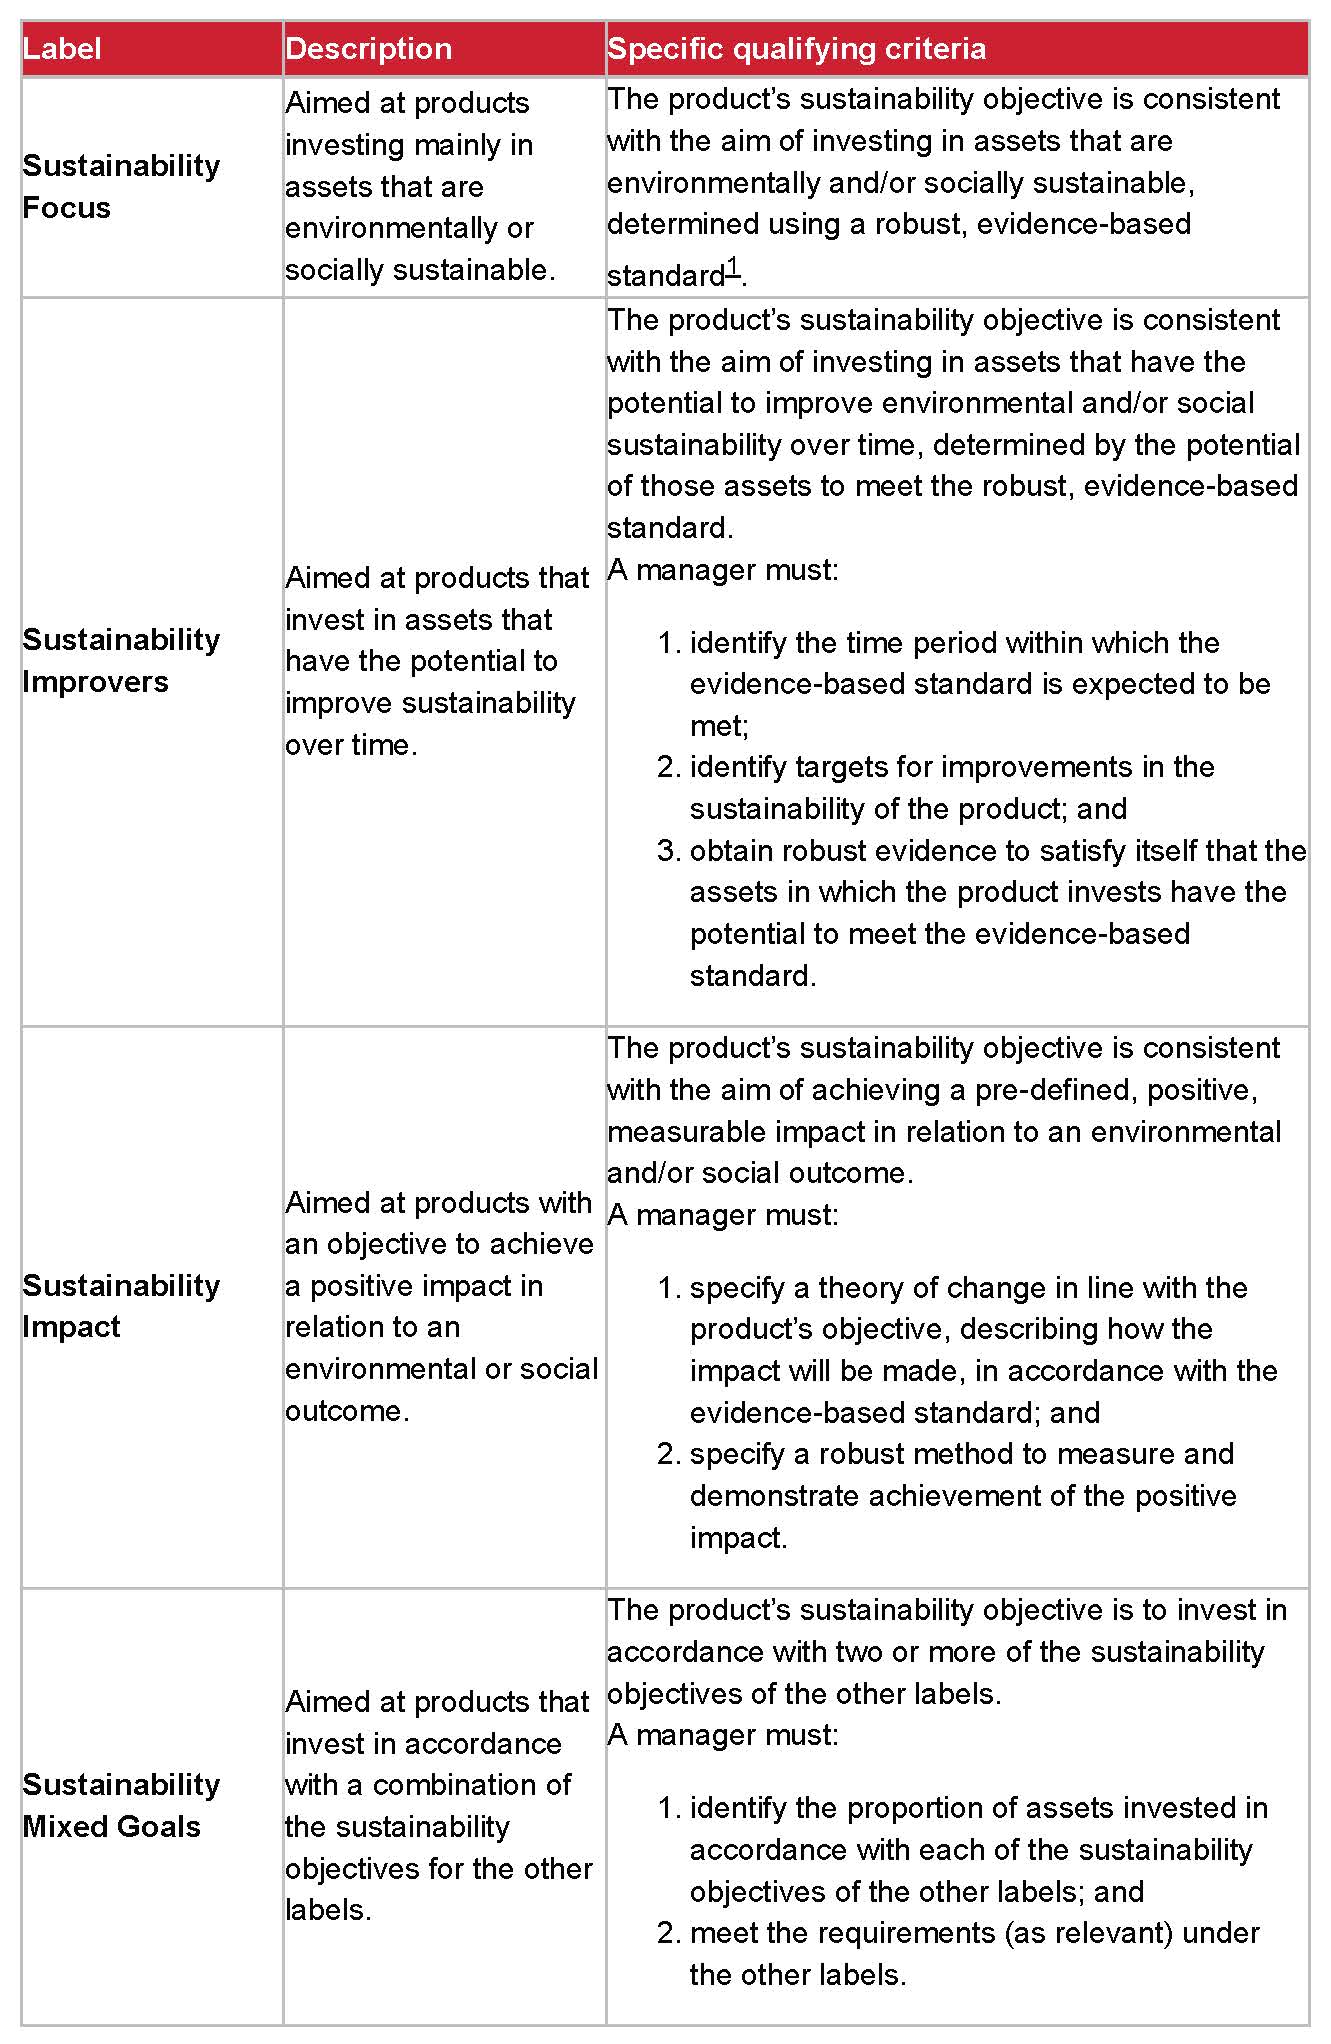 Table setting out the four sustainability investment product labels (sustainability focus, sustainability improvers, sustainability impact and sustainability mixed goals) and the criteria that need to be met to use the labels.